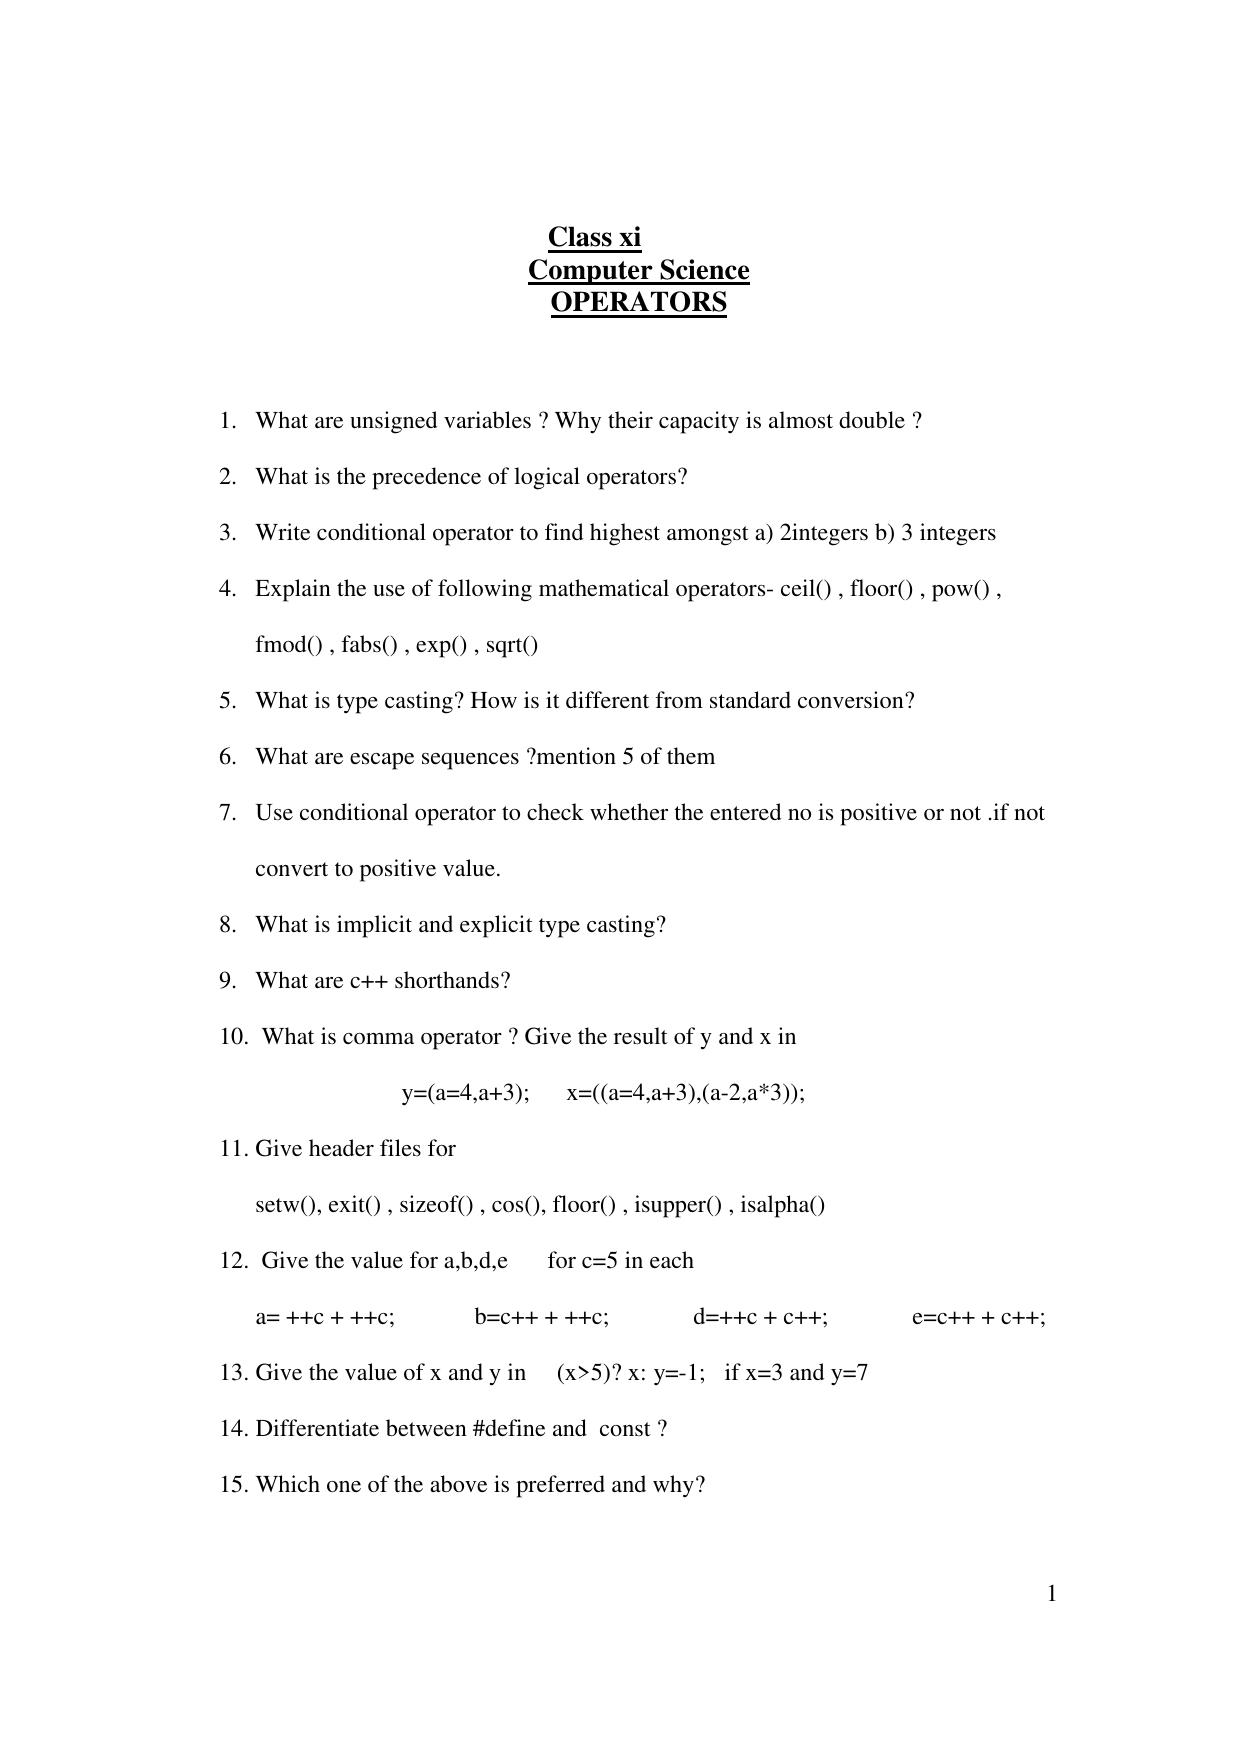 CBSE Worksheets for Class 11 Computer Science Assignment 9 - Page 1